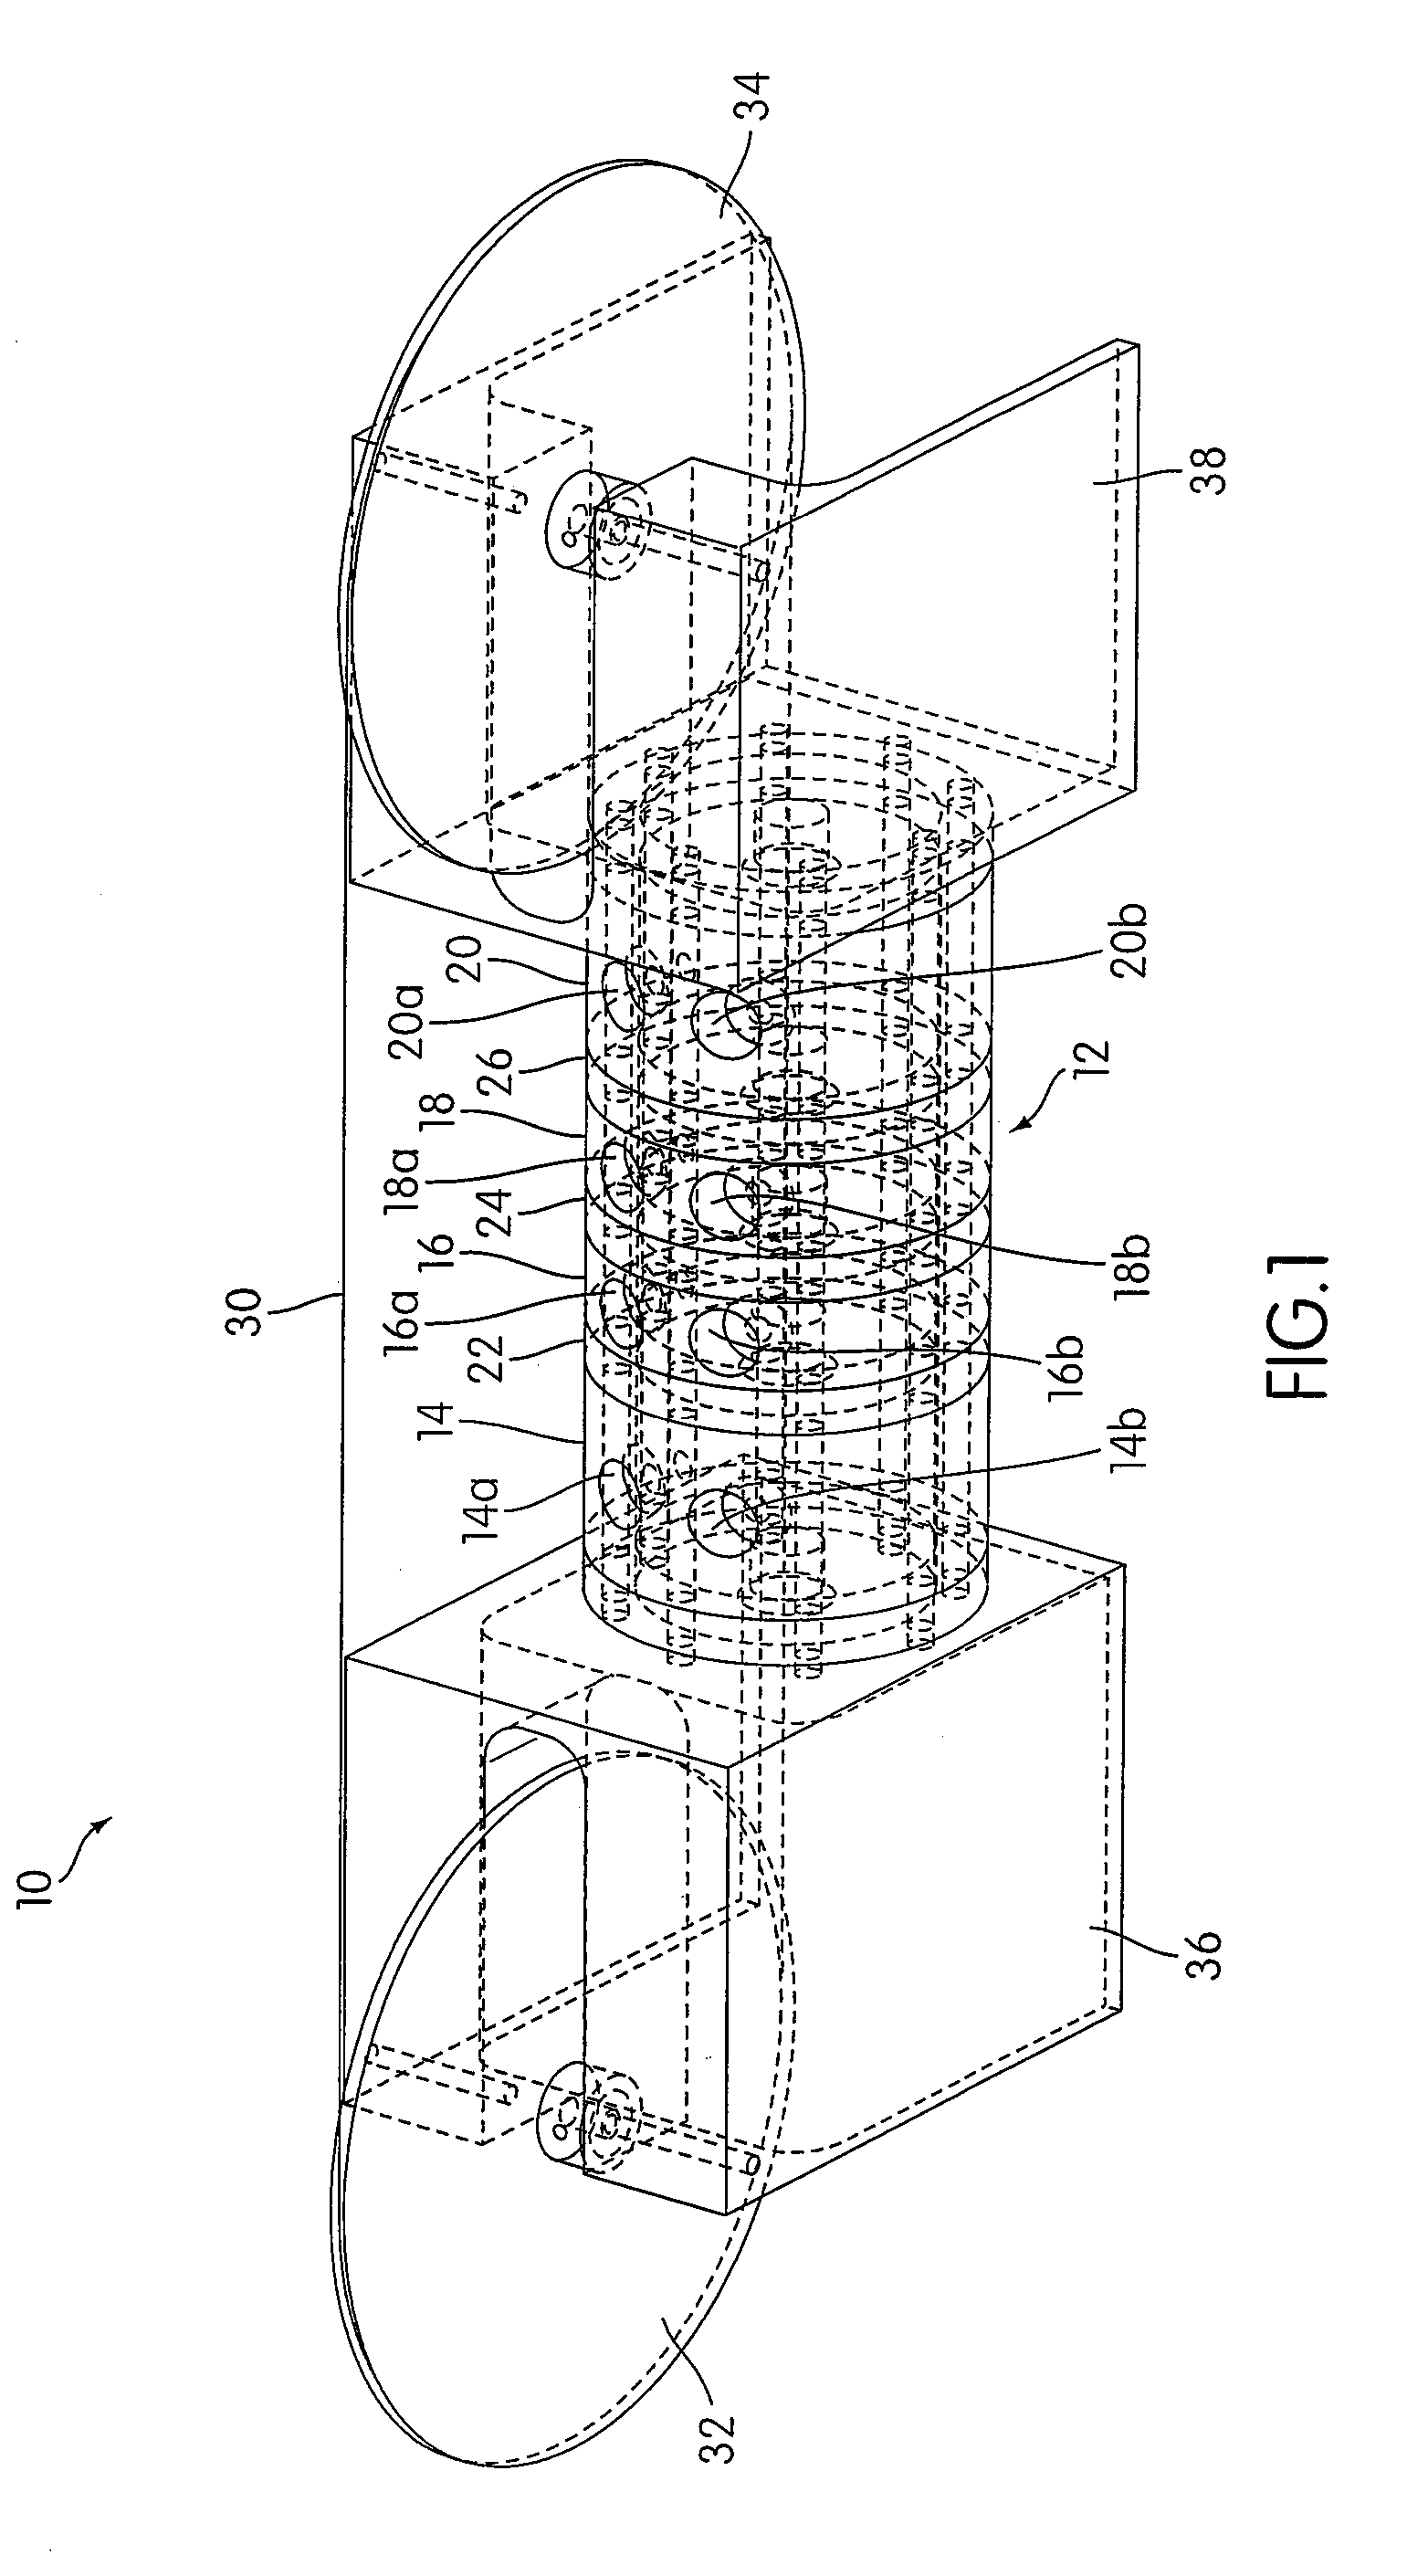 Method and apparatus for ammonia (NH3) generation